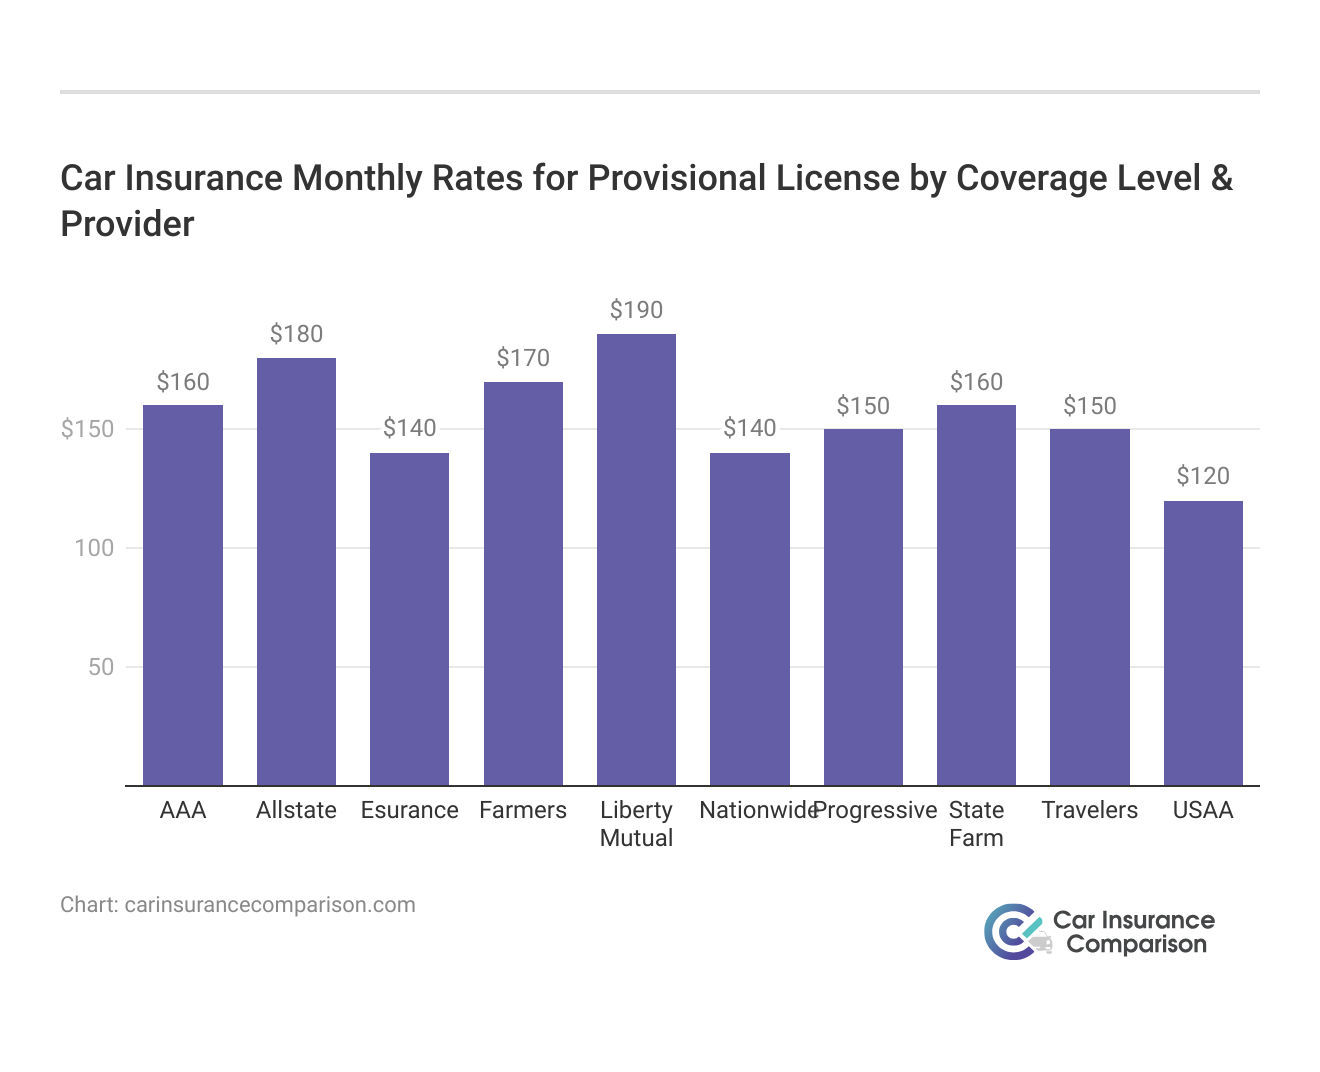 <h3>Car Insurance Monthly Rates for Provisional License by Coverage Level & Provider</h3>